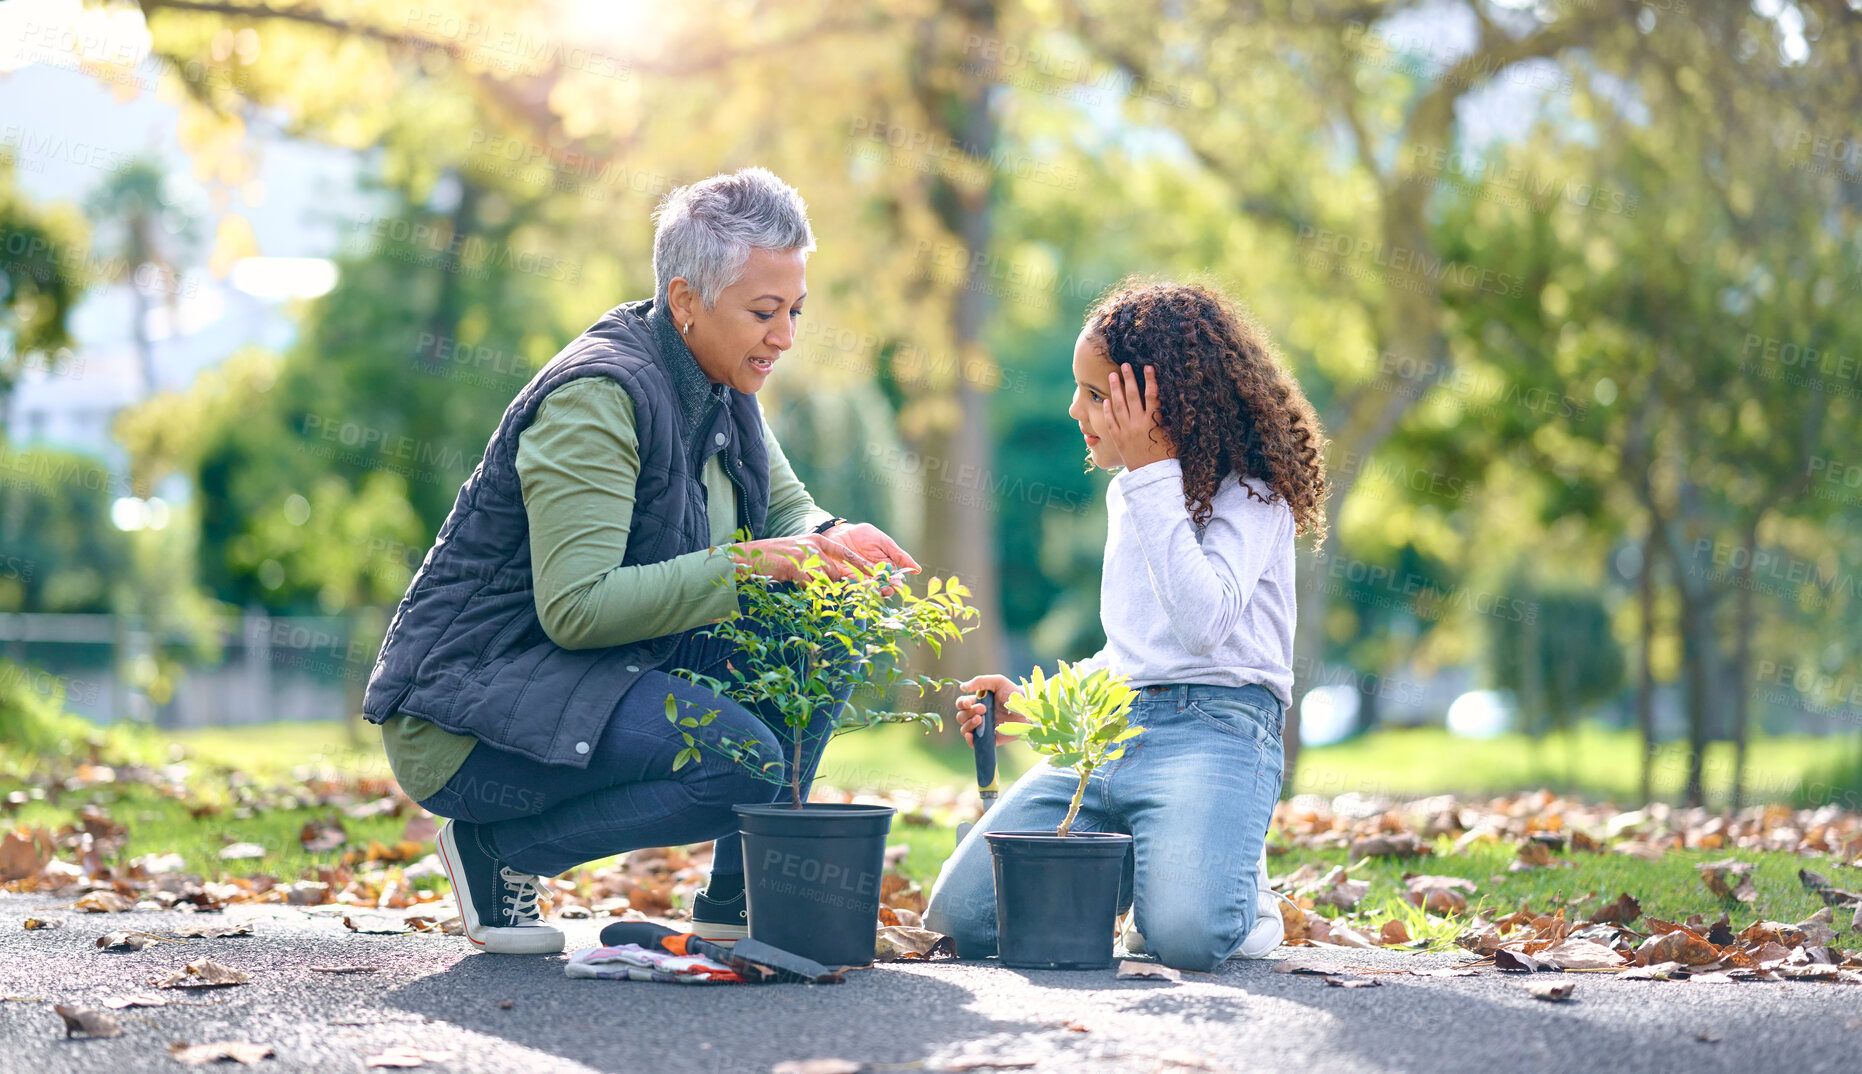 Buy stock photo Child, woman and plant for gardening in a park with trees in nature, agriculture or garden. Volunteer team learning growth, ecology and sustainability for outdoor community enviroment on Earth day